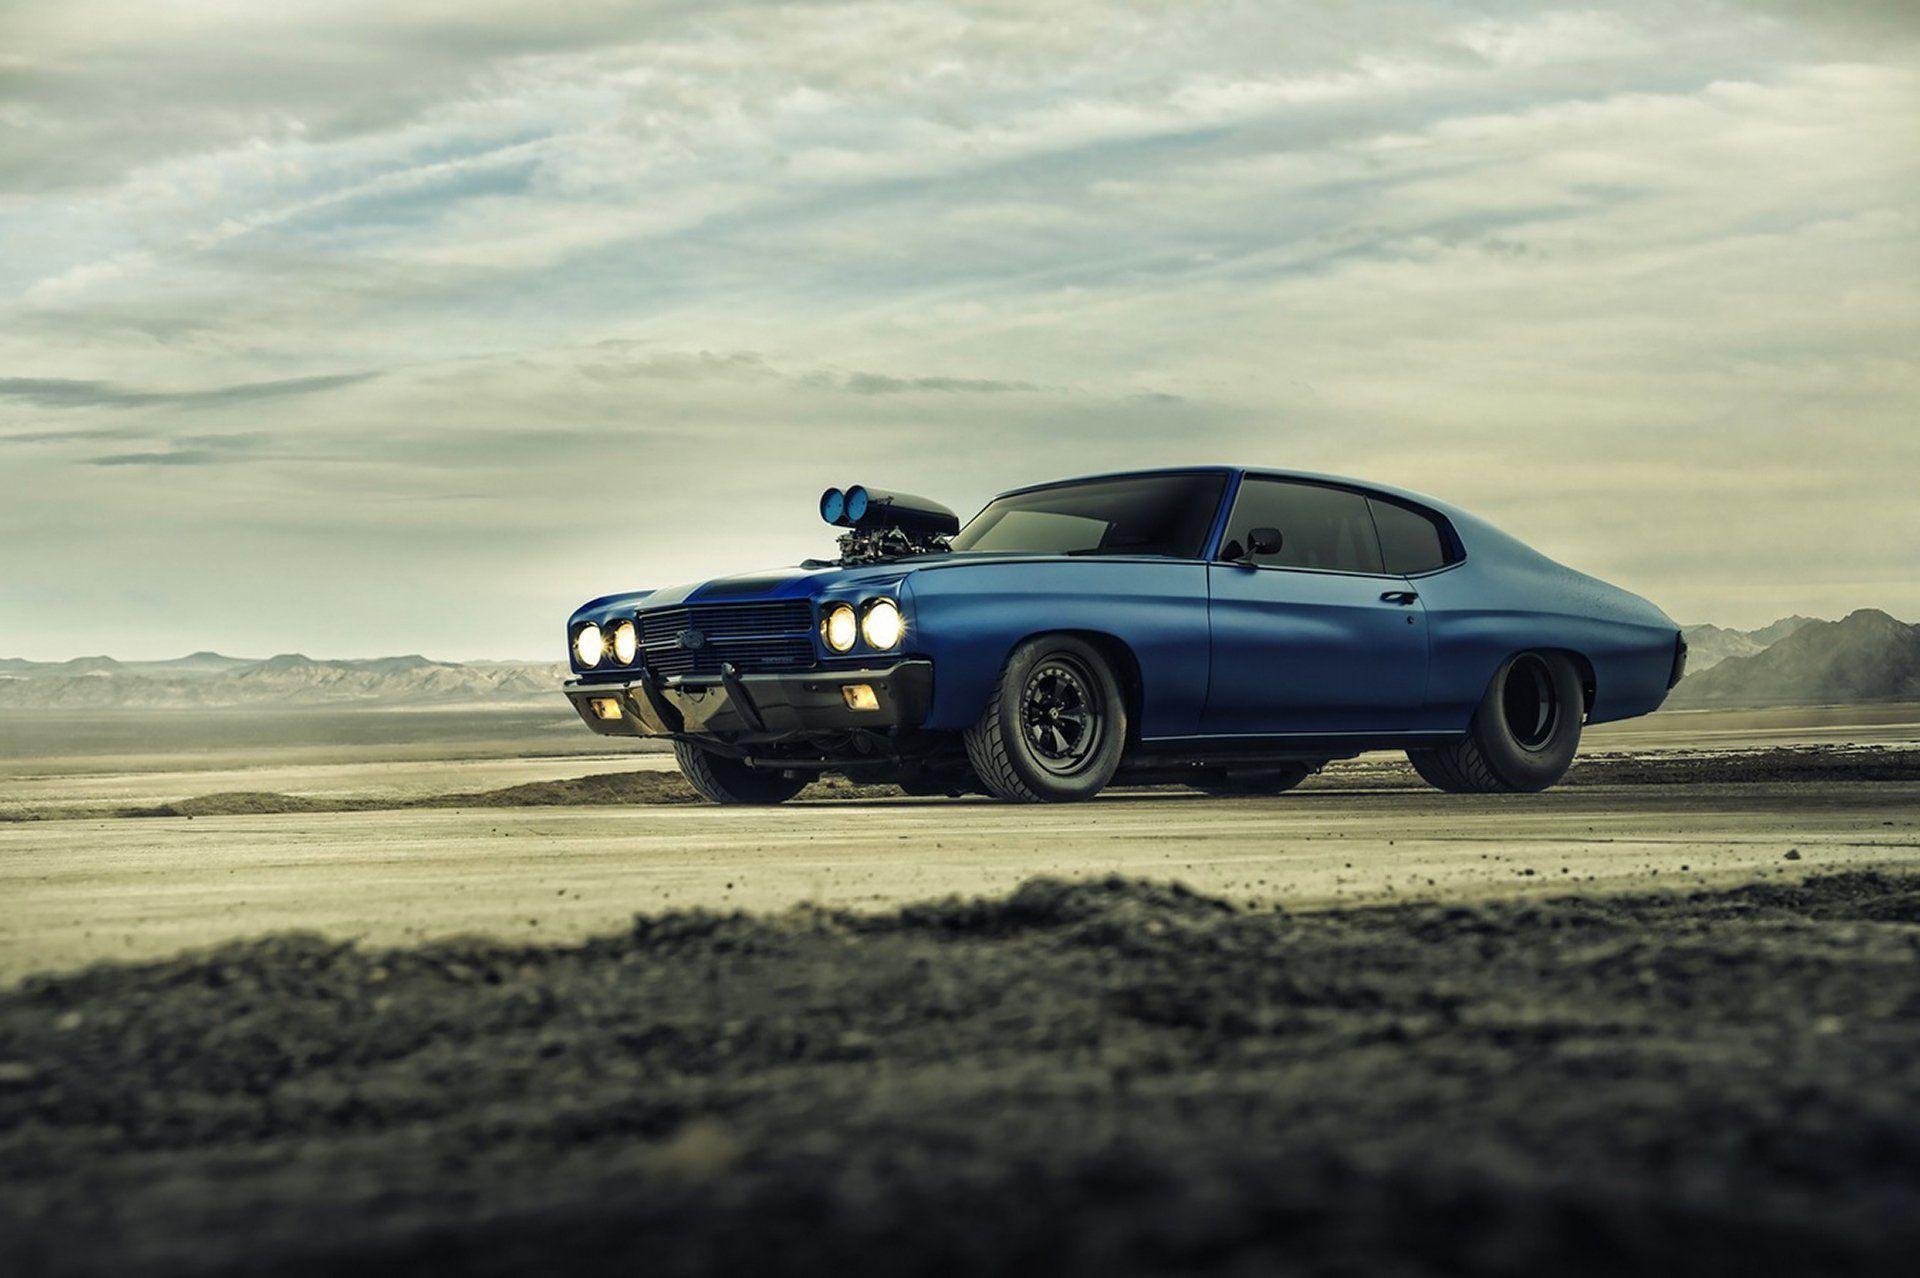 chevrolet chevelle ss 1970 supercharger blue dragster muscle car